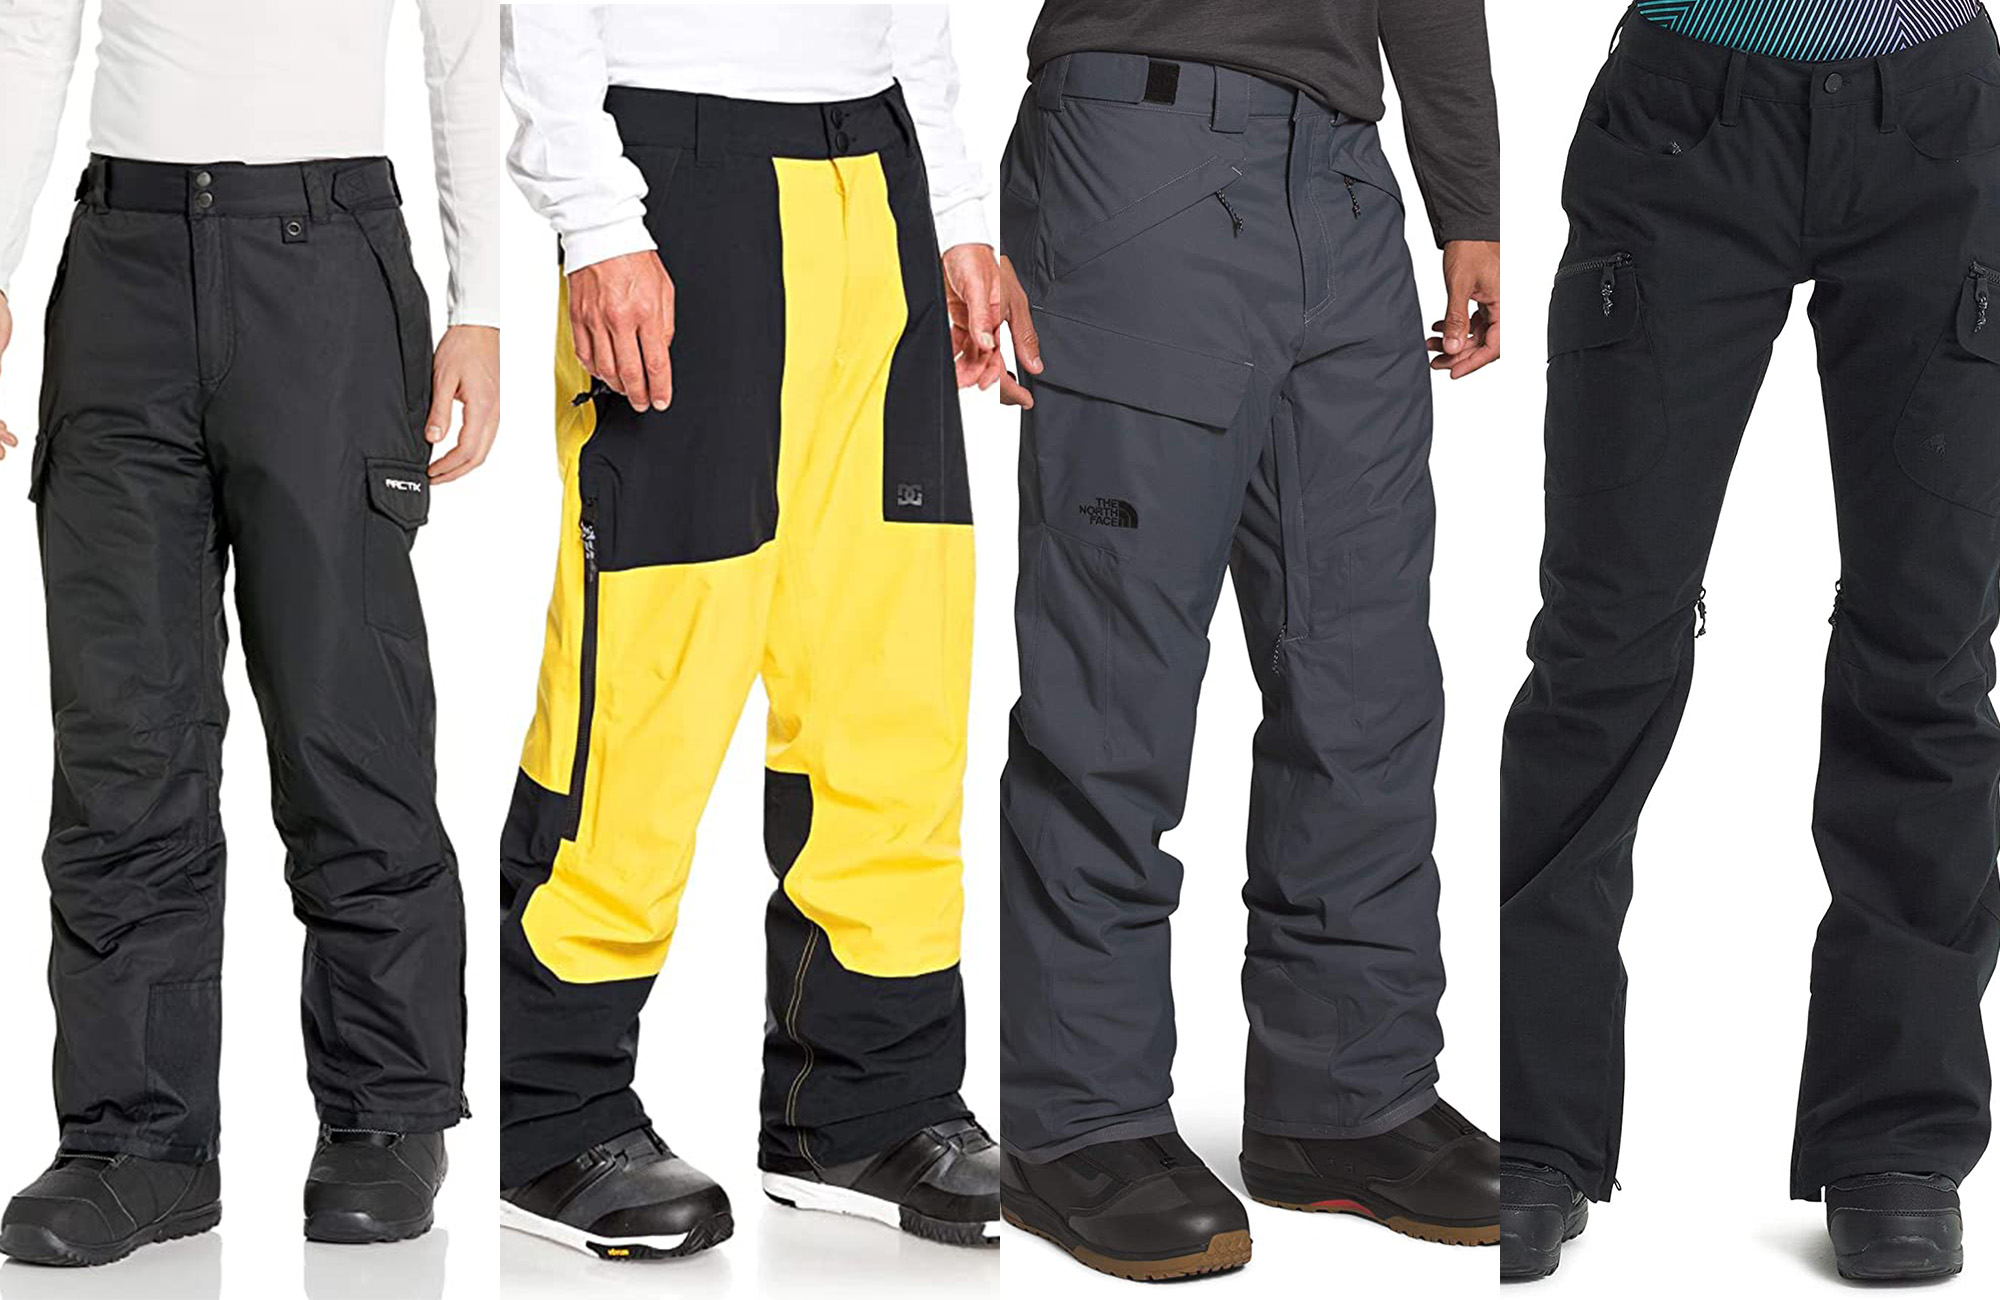 Staying Warm with Lined Pants and Coveralls this Winter